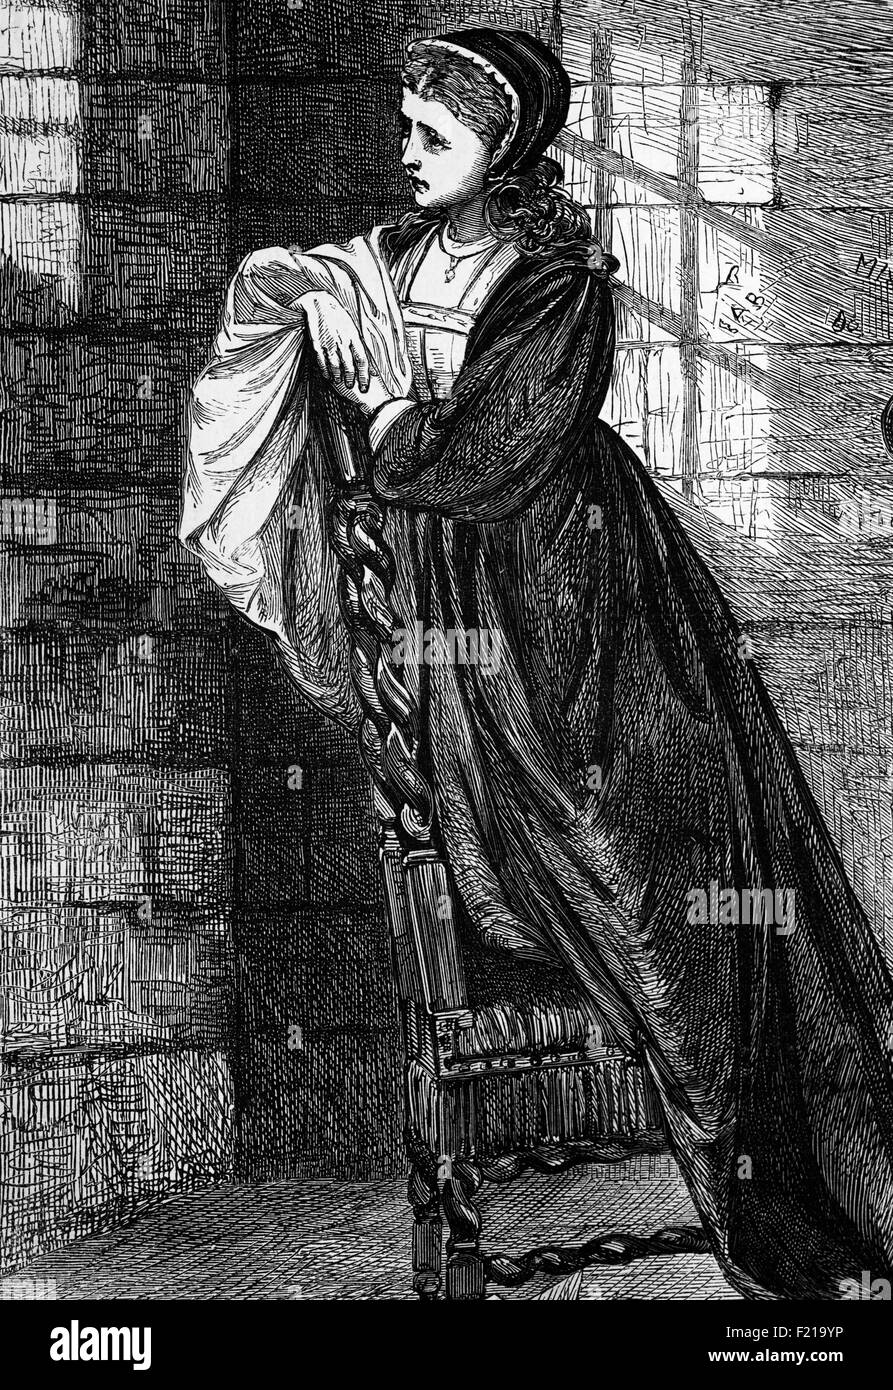 Lady Jane Grey watches her husband Lord Guildford Dudley, son of the  Duke of Northumberland pass on his way to execution. Following her time as the Nine Day Queen, they were condemned to death for high treason by Queen Mary I in November 1553. Stock Photo